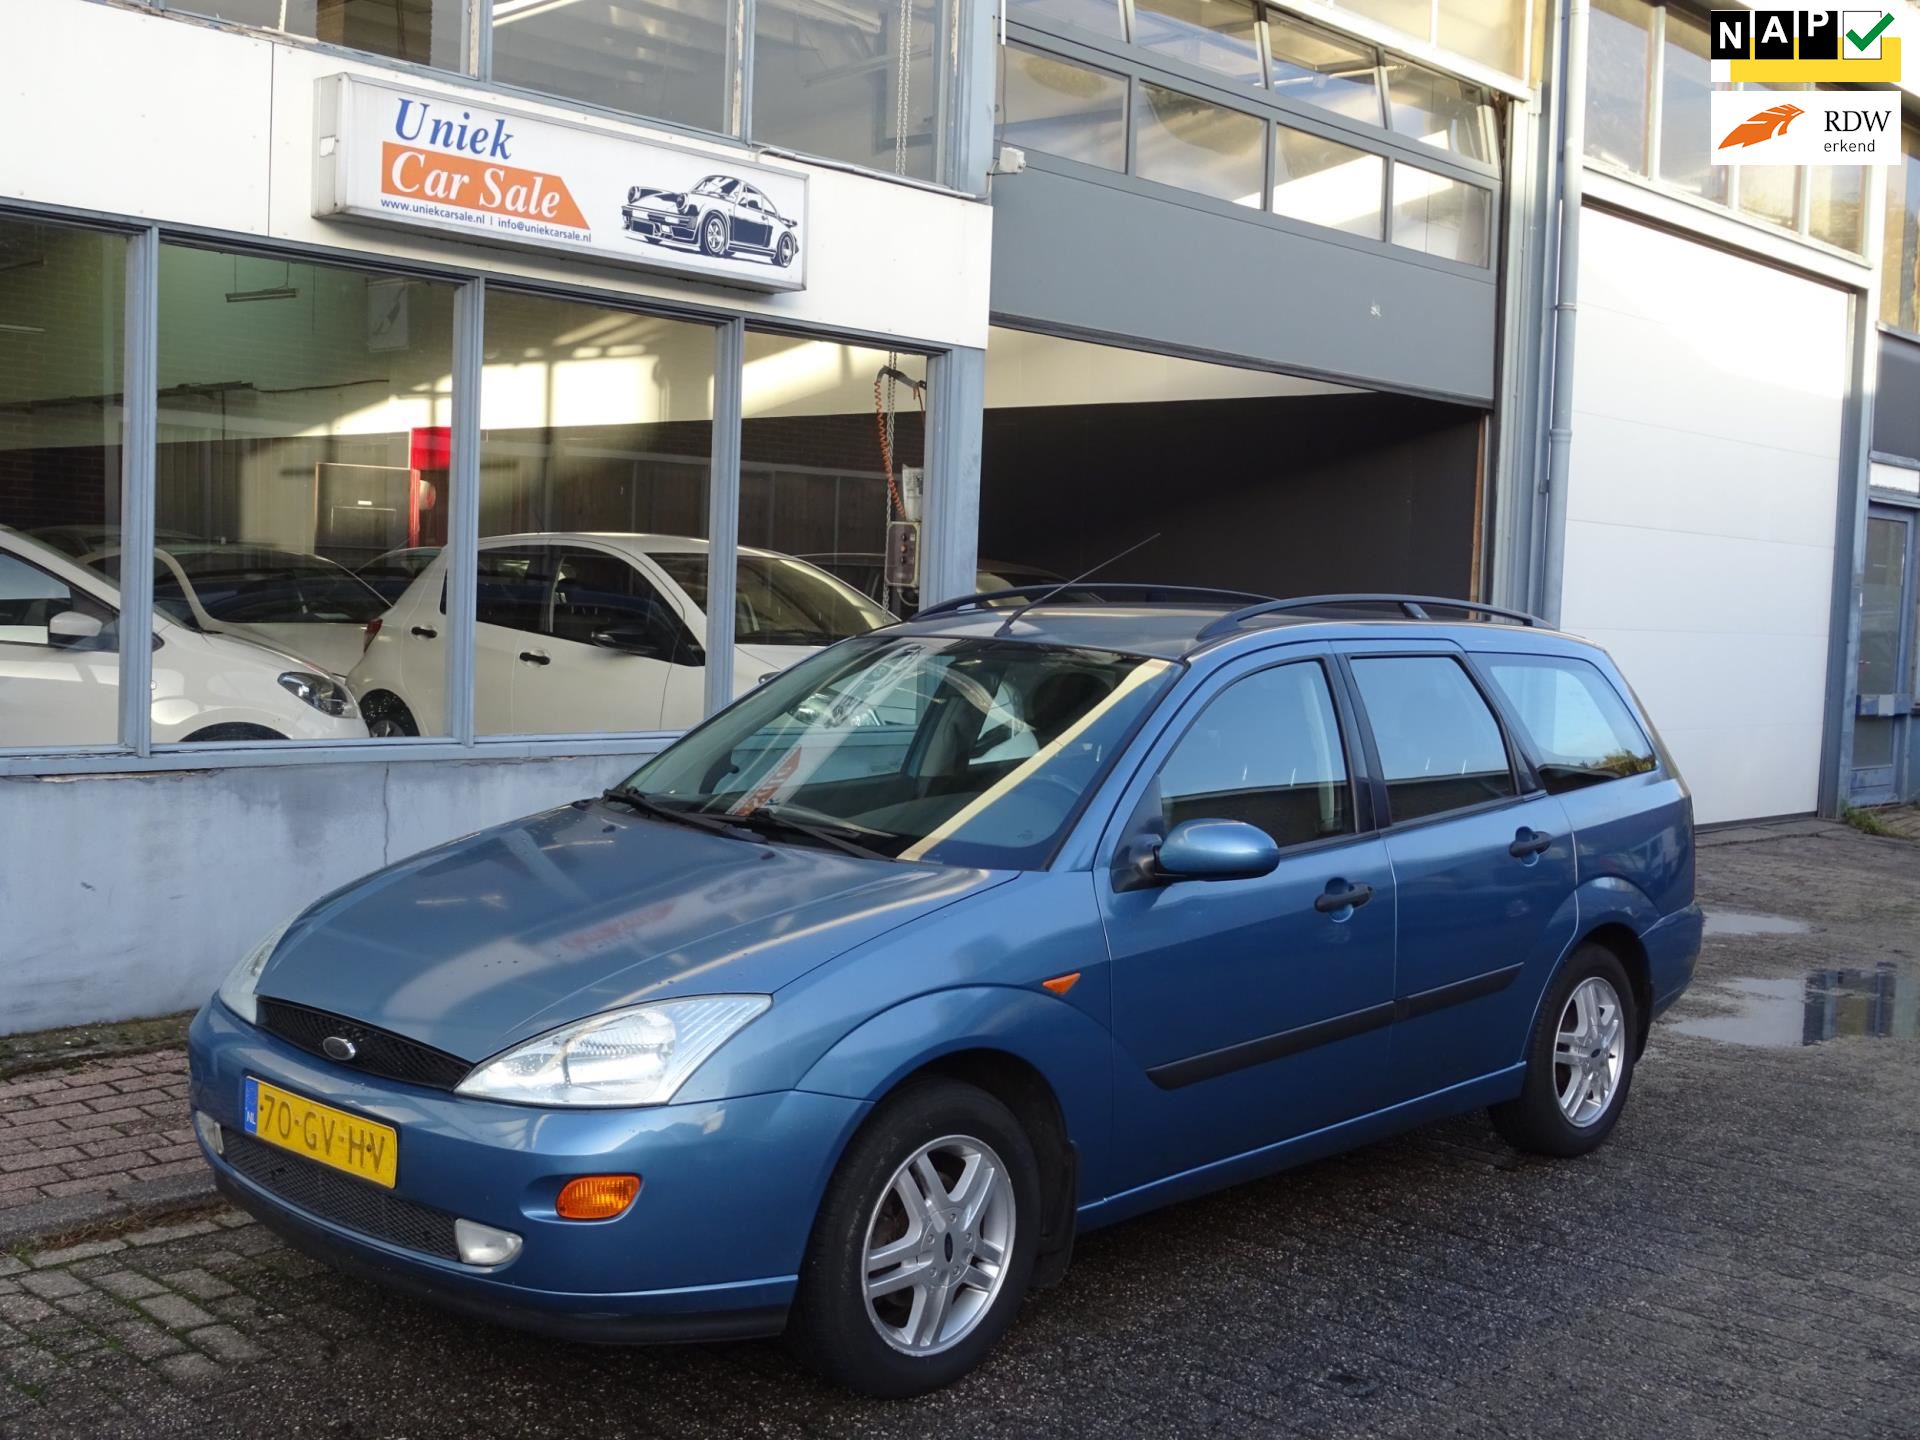 Rood Meestal Scepticisme Ford Focus Wagon - 1.6- 16V Collection Benzine uit 2001 -  www.uniekcarsale.nl